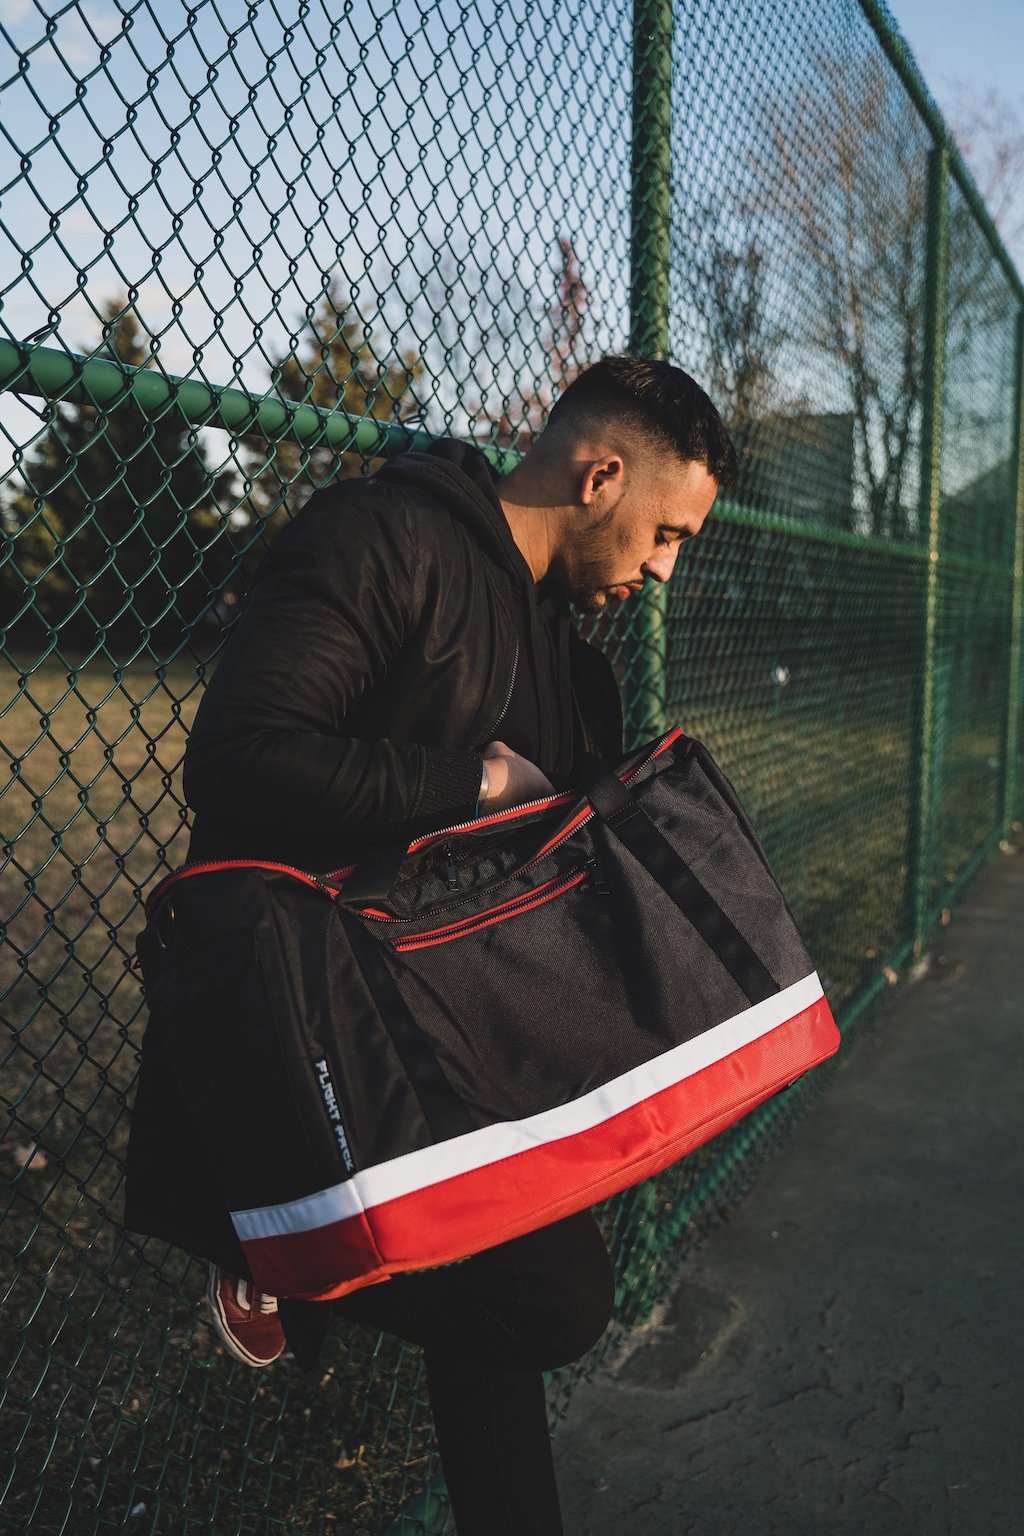 Sneaker Duffle Bag With Hanging Closet Shoe Bag To Match Bred 11s